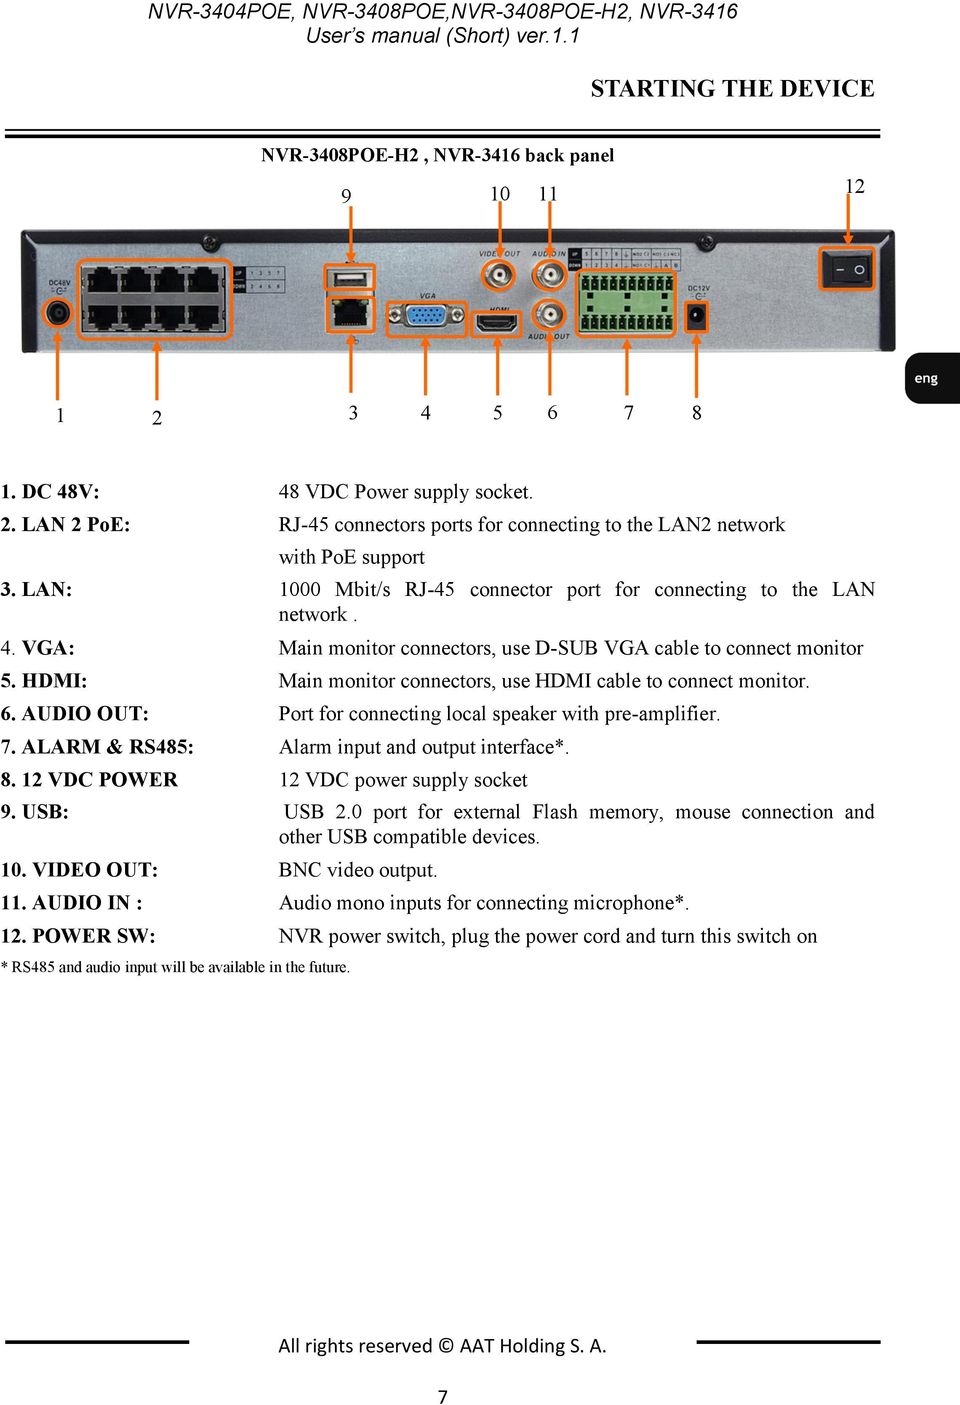 HDMI: Main monitor connectors, use HDMI cable to connect monitor. 6. AUDIO OUT: Port for connecting local speaker with pre-amplifier. 7. ALARM & RS485: Alarm input and output interface*. 8.